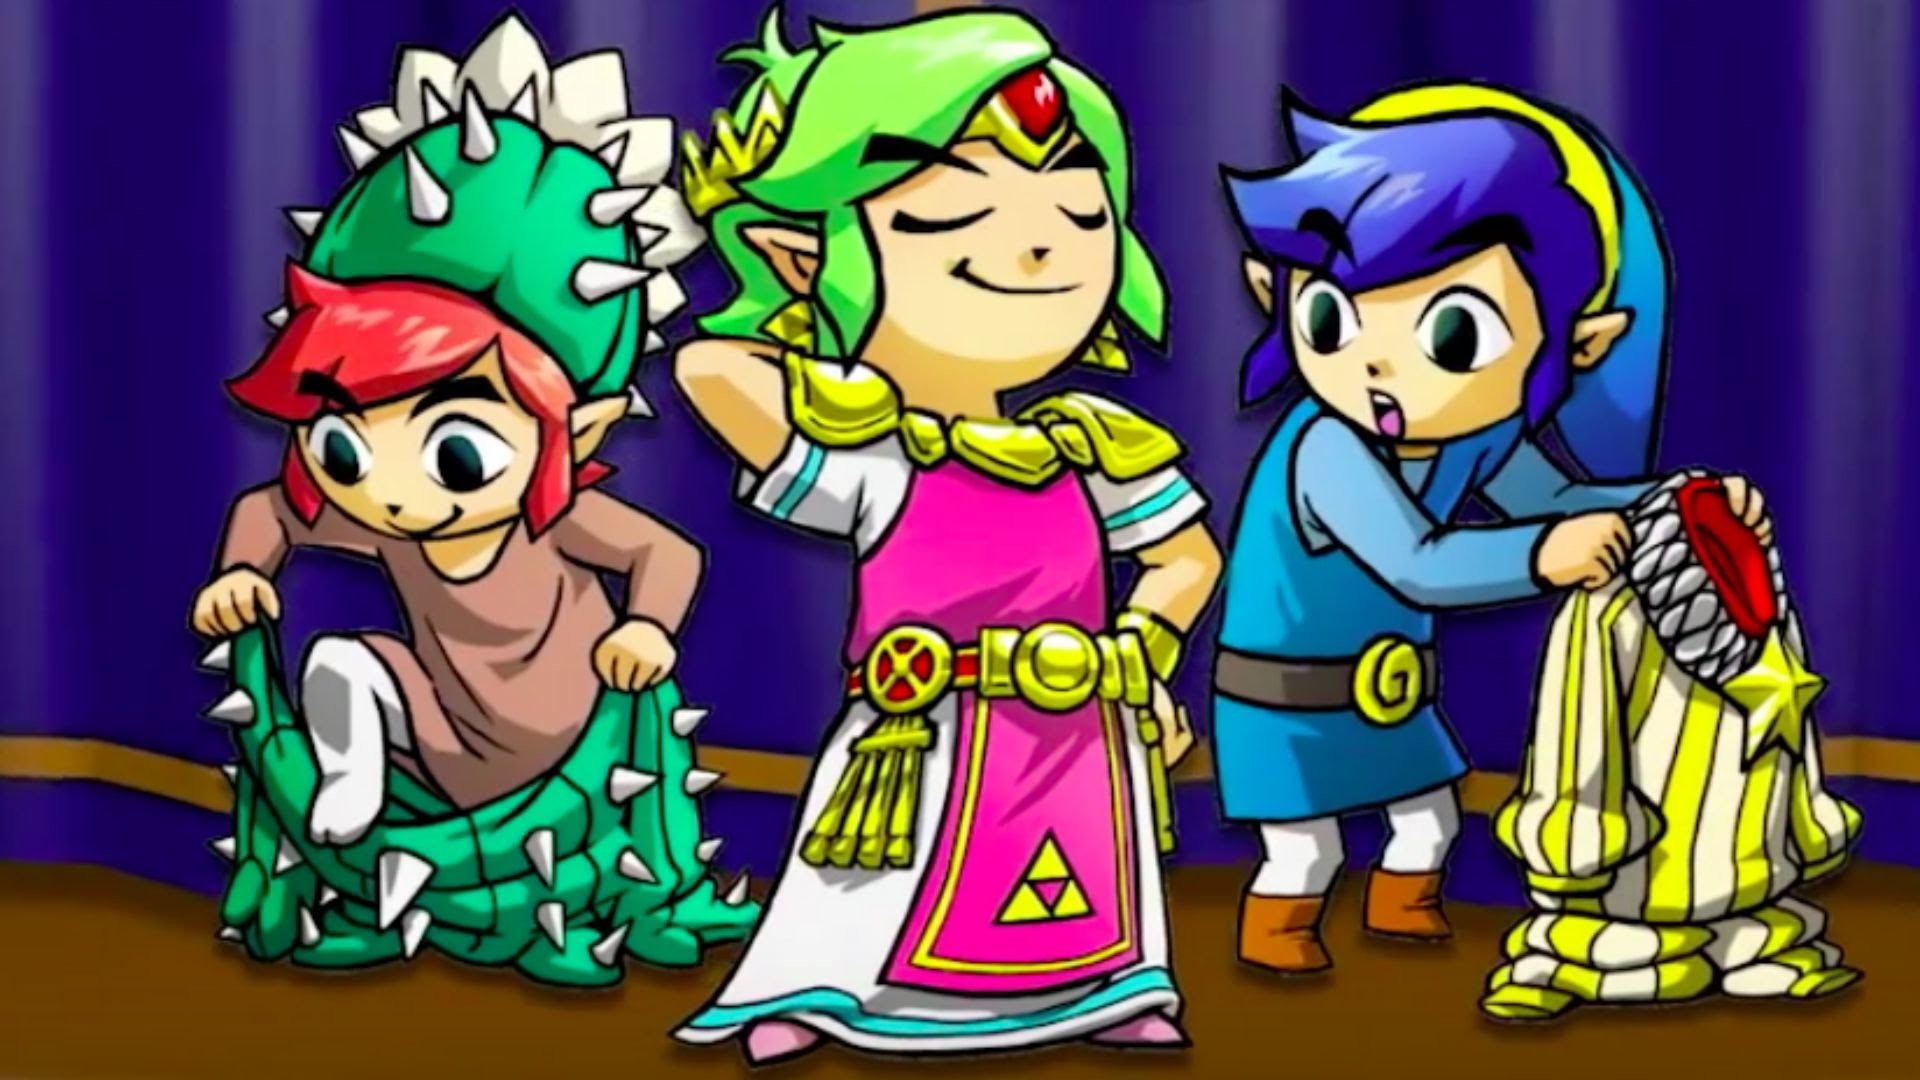 1920x1080 The Legend of Zelda: Tri Force Heroes - Official Preview Trailer